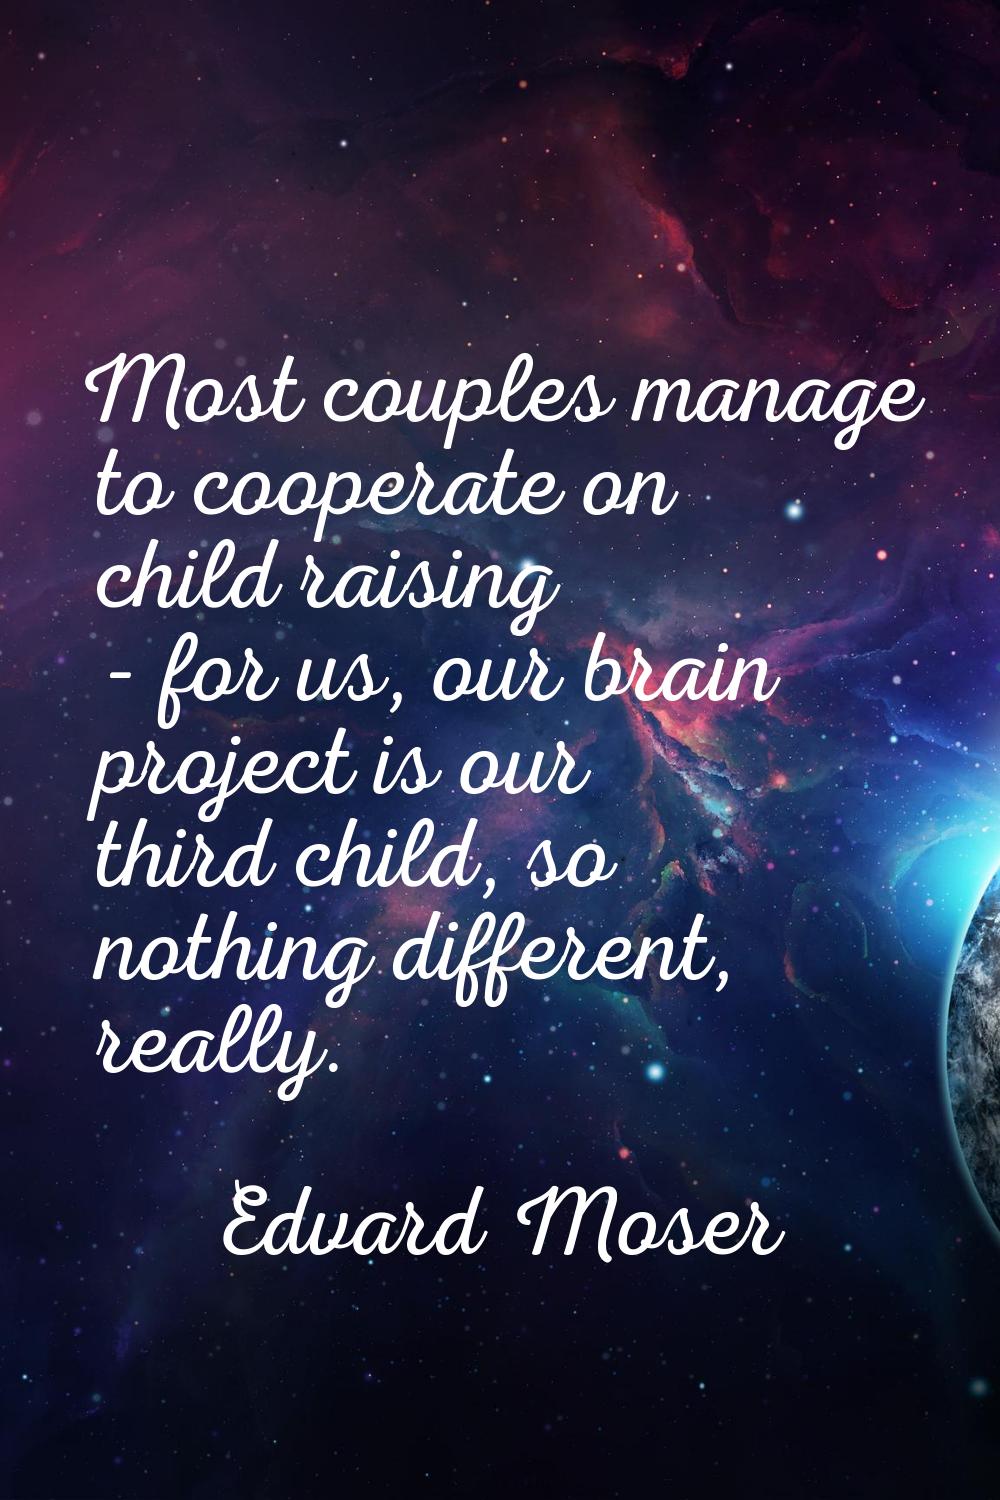 Most couples manage to cooperate on child raising - for us, our brain project is our third child, s